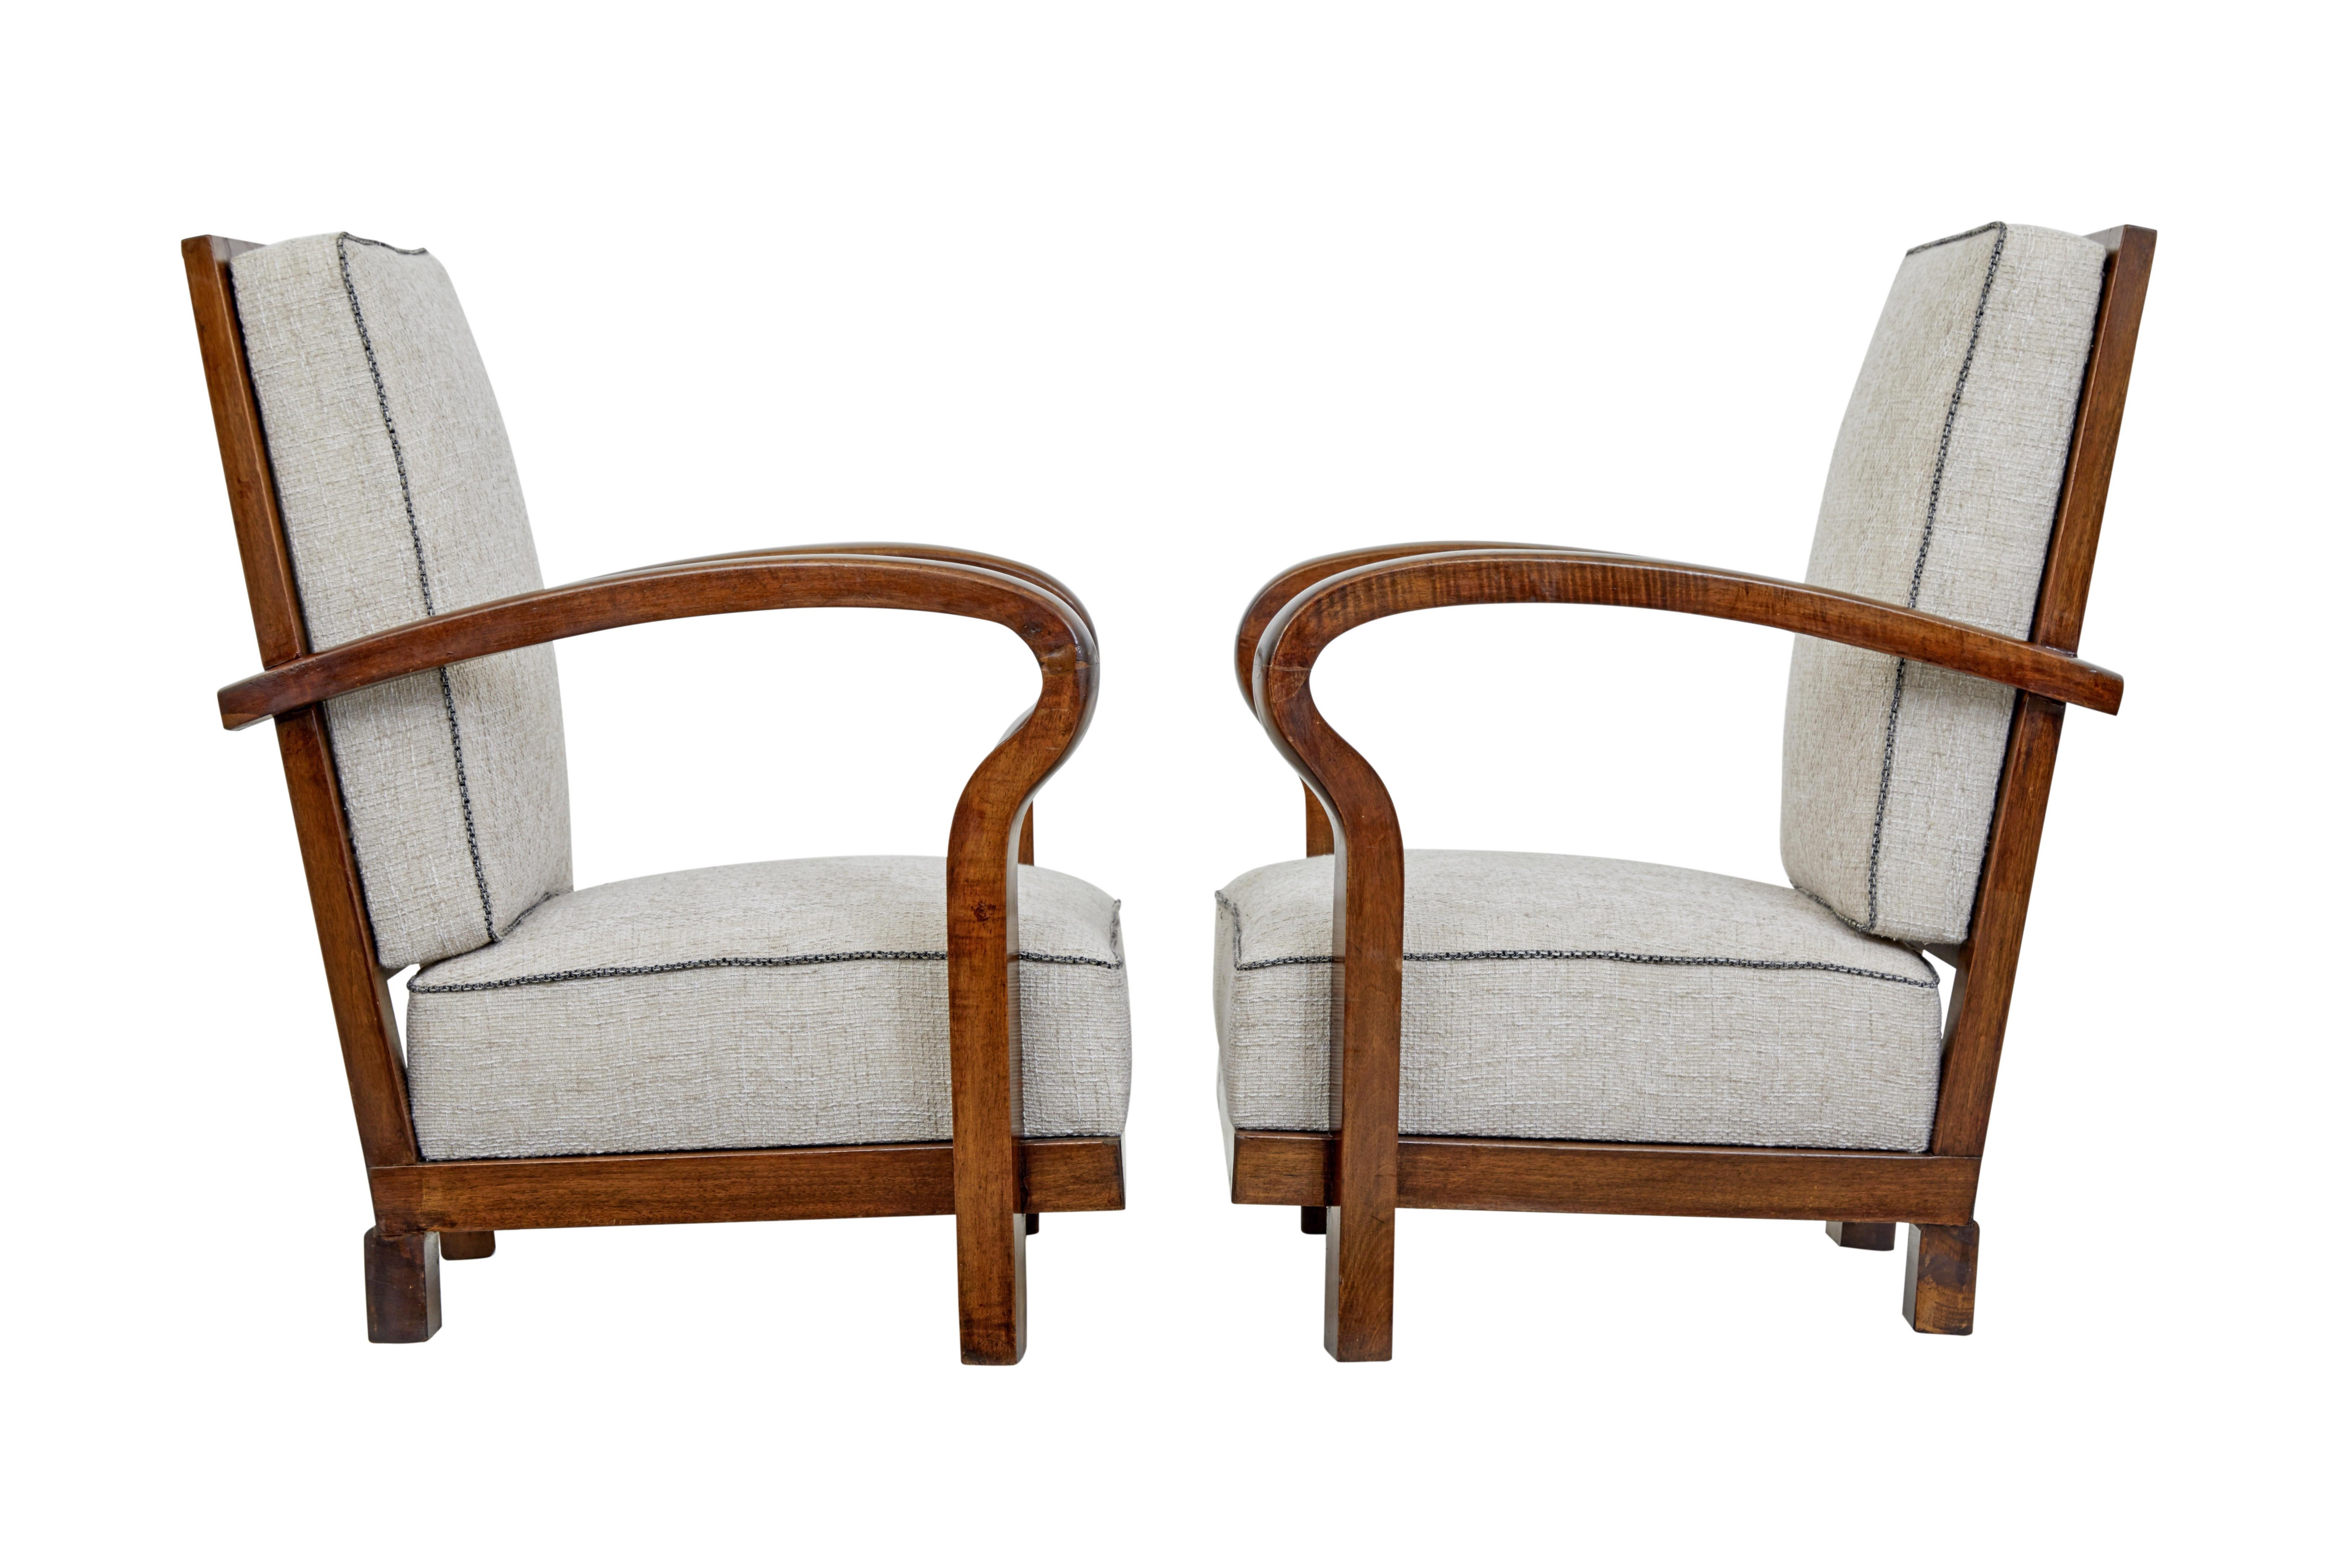 Swedish Pair of Mid-20th Century Walnut Open Frame Lounge Chairs